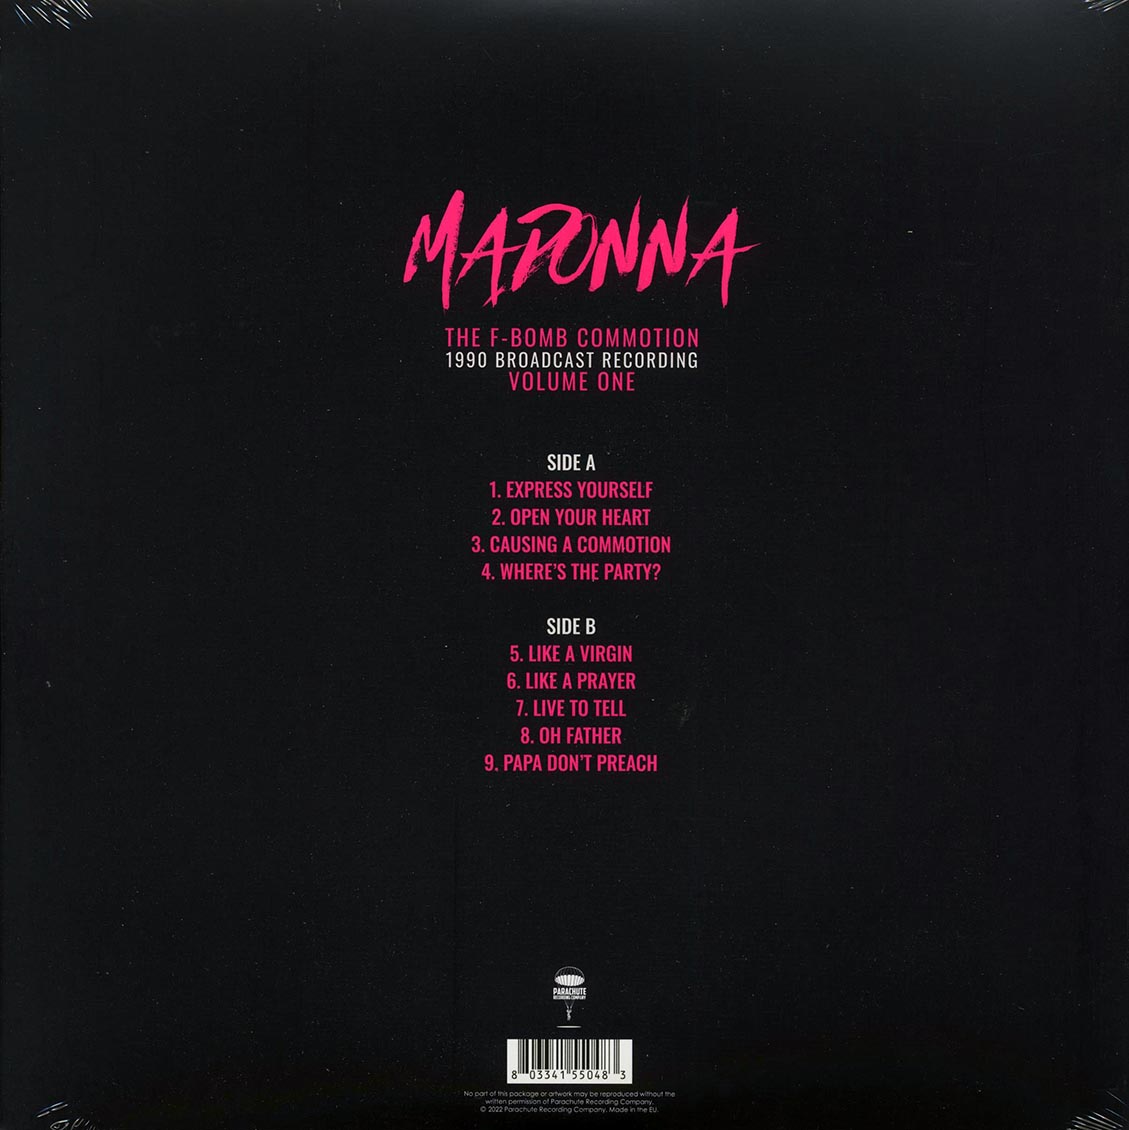 Madonna - The F-bomb Commotion Volume 1: 1990 Broadcast Recording